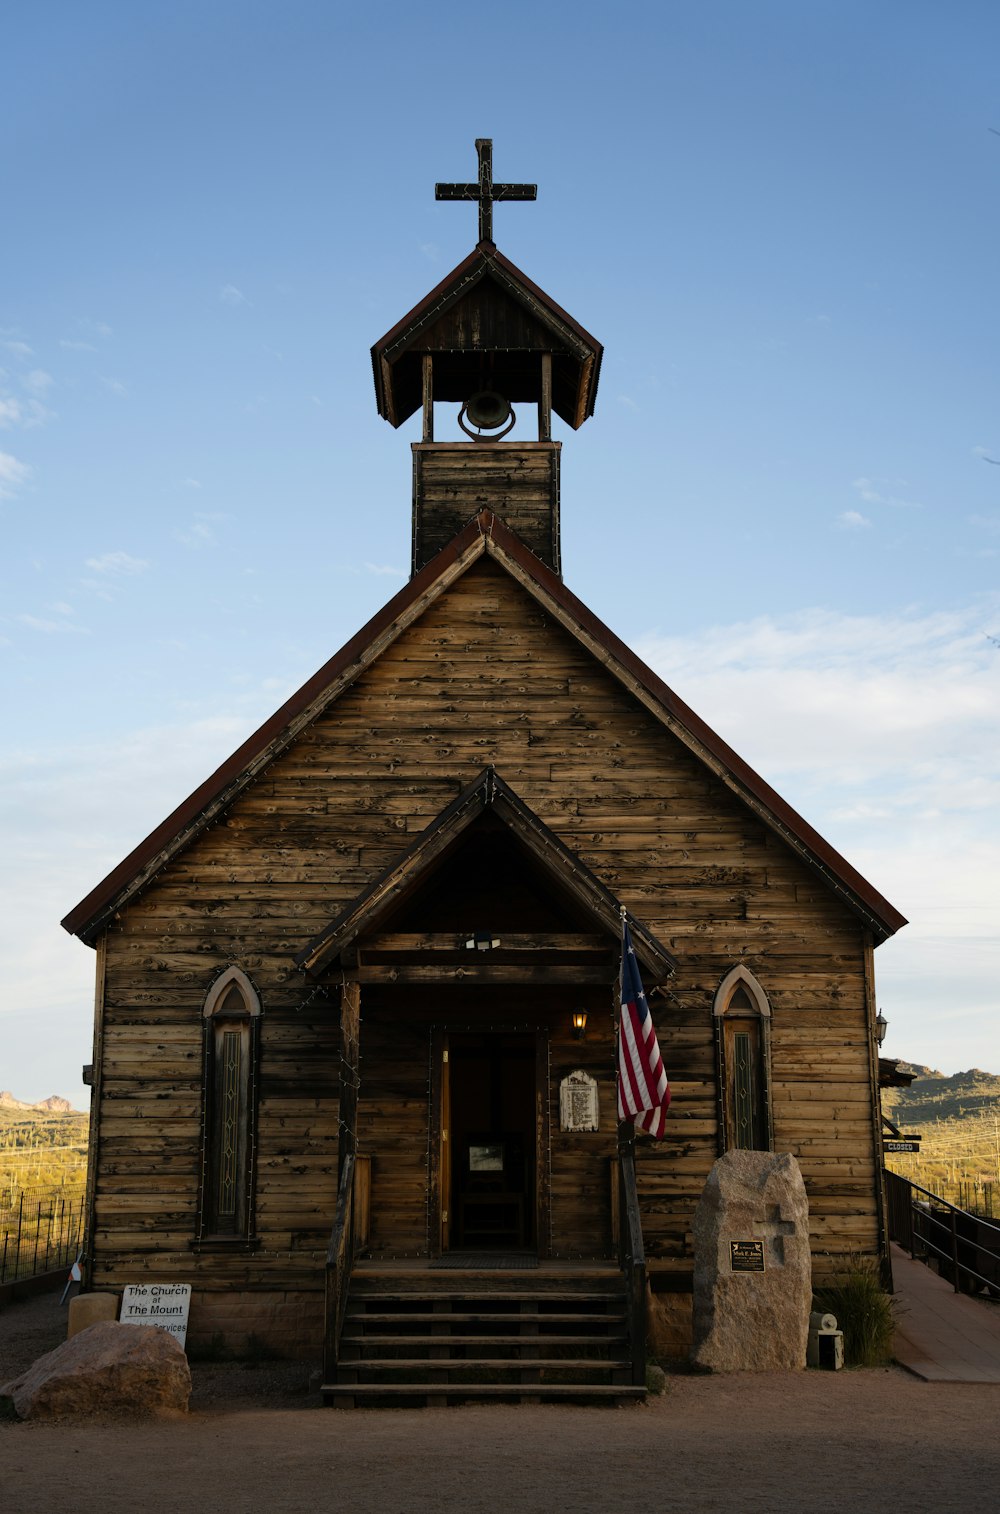 an old wooden church with a cross on top